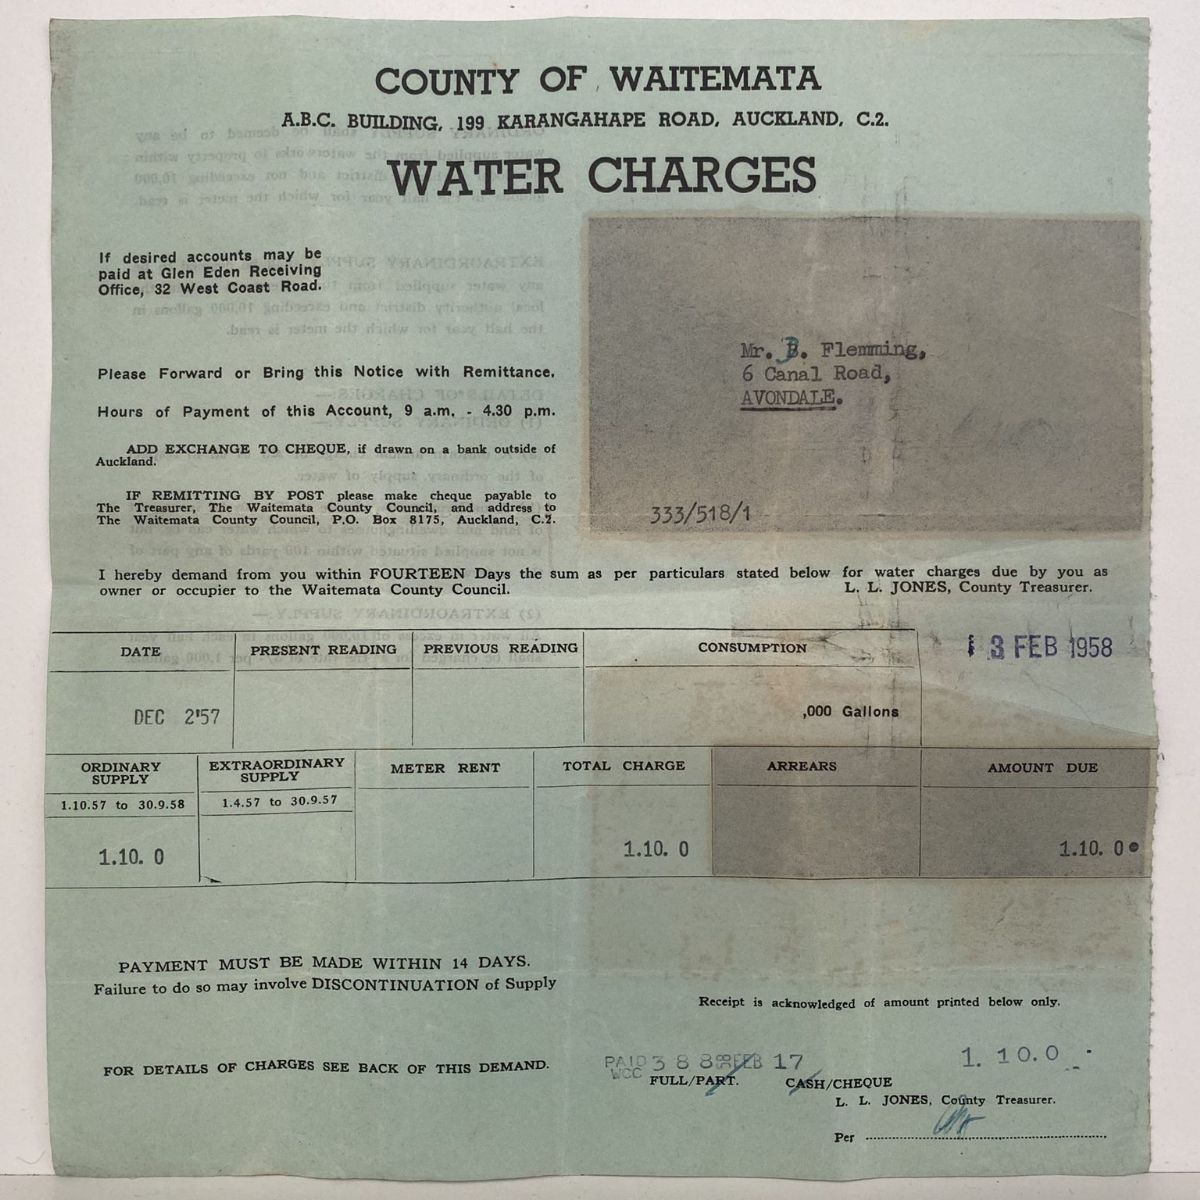 OLD INVOICE / RECEIPT: Water Charges from County of Waitemata 1958